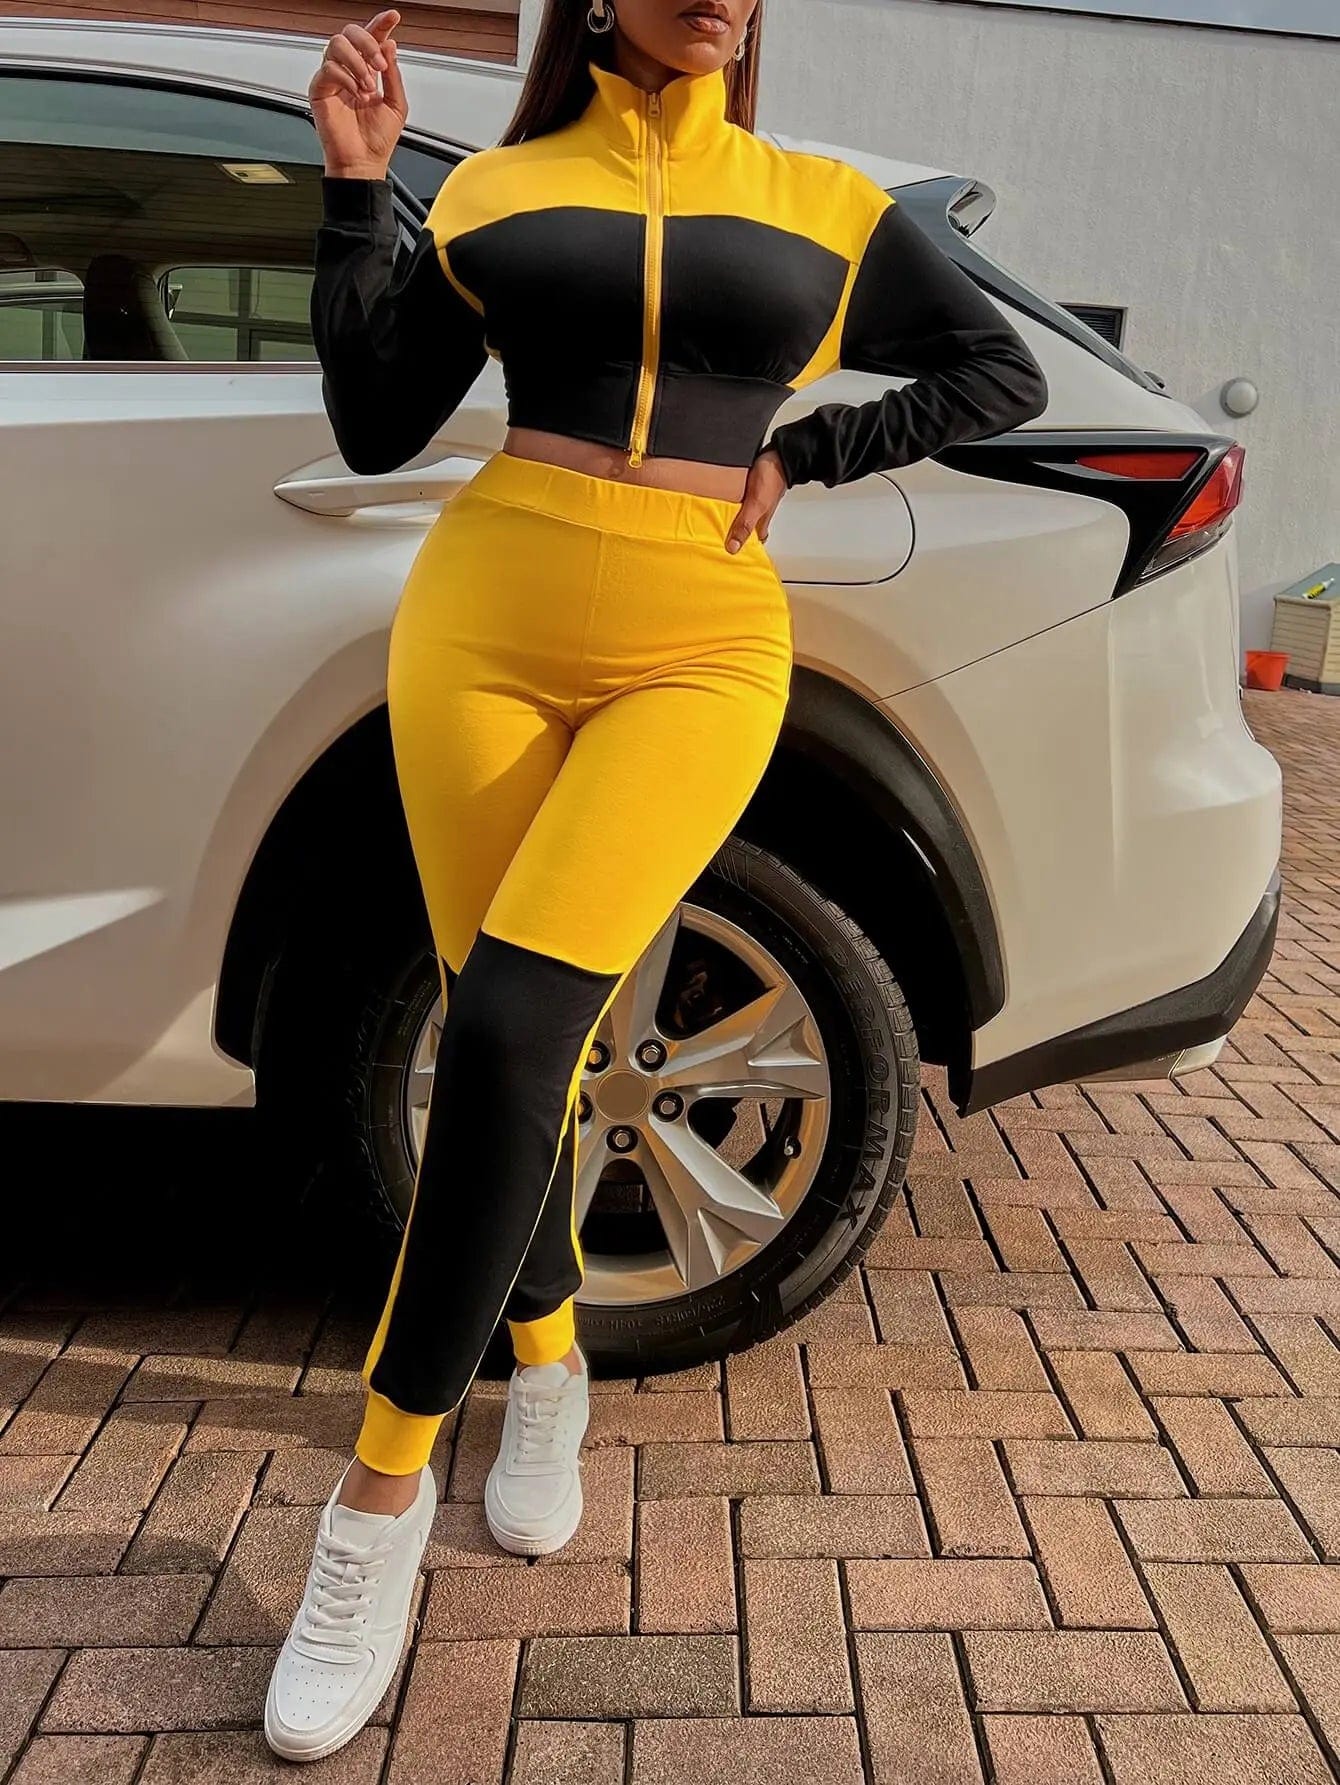 Two-Tone Collared Neck Top and Joggers Set - CLASSY CLOSET BOUTIQUETwo-Tone Collared Neck Top and Joggers Set2 piece set100102687944076Yellow/BlackL